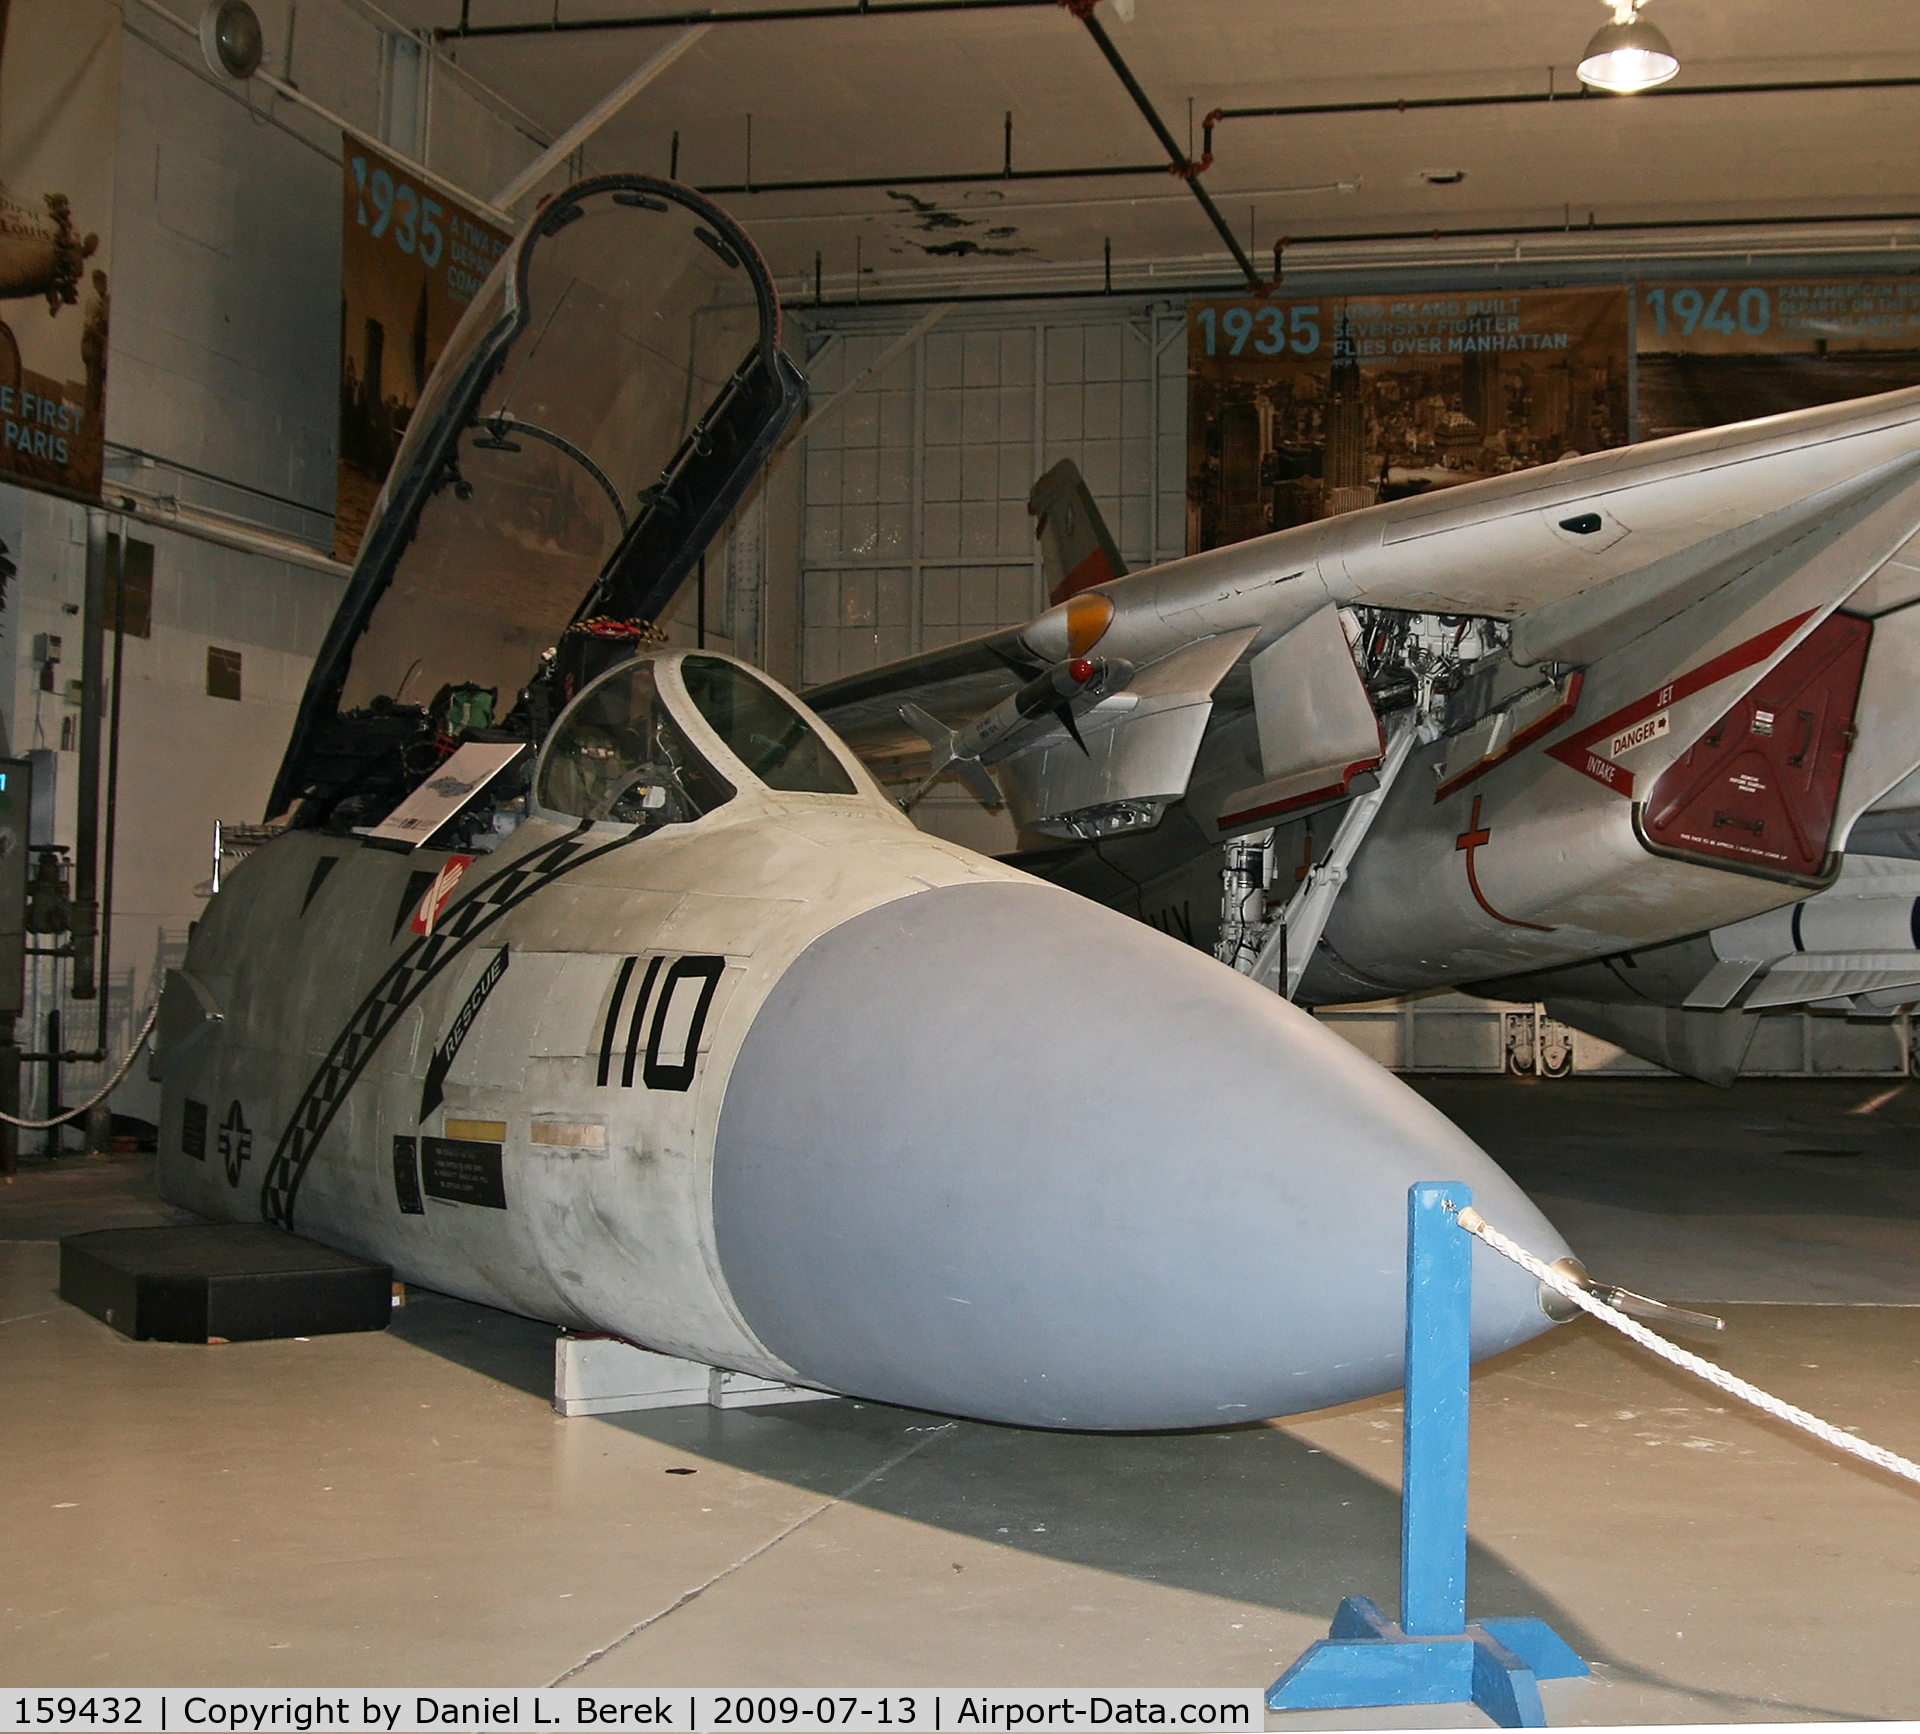 159432, 1974 Grumman F-14A Tomcat C/N 98, Nose section, formerly used as a pilot trainer, has been preserved at the Cradle of Aviation Museum.